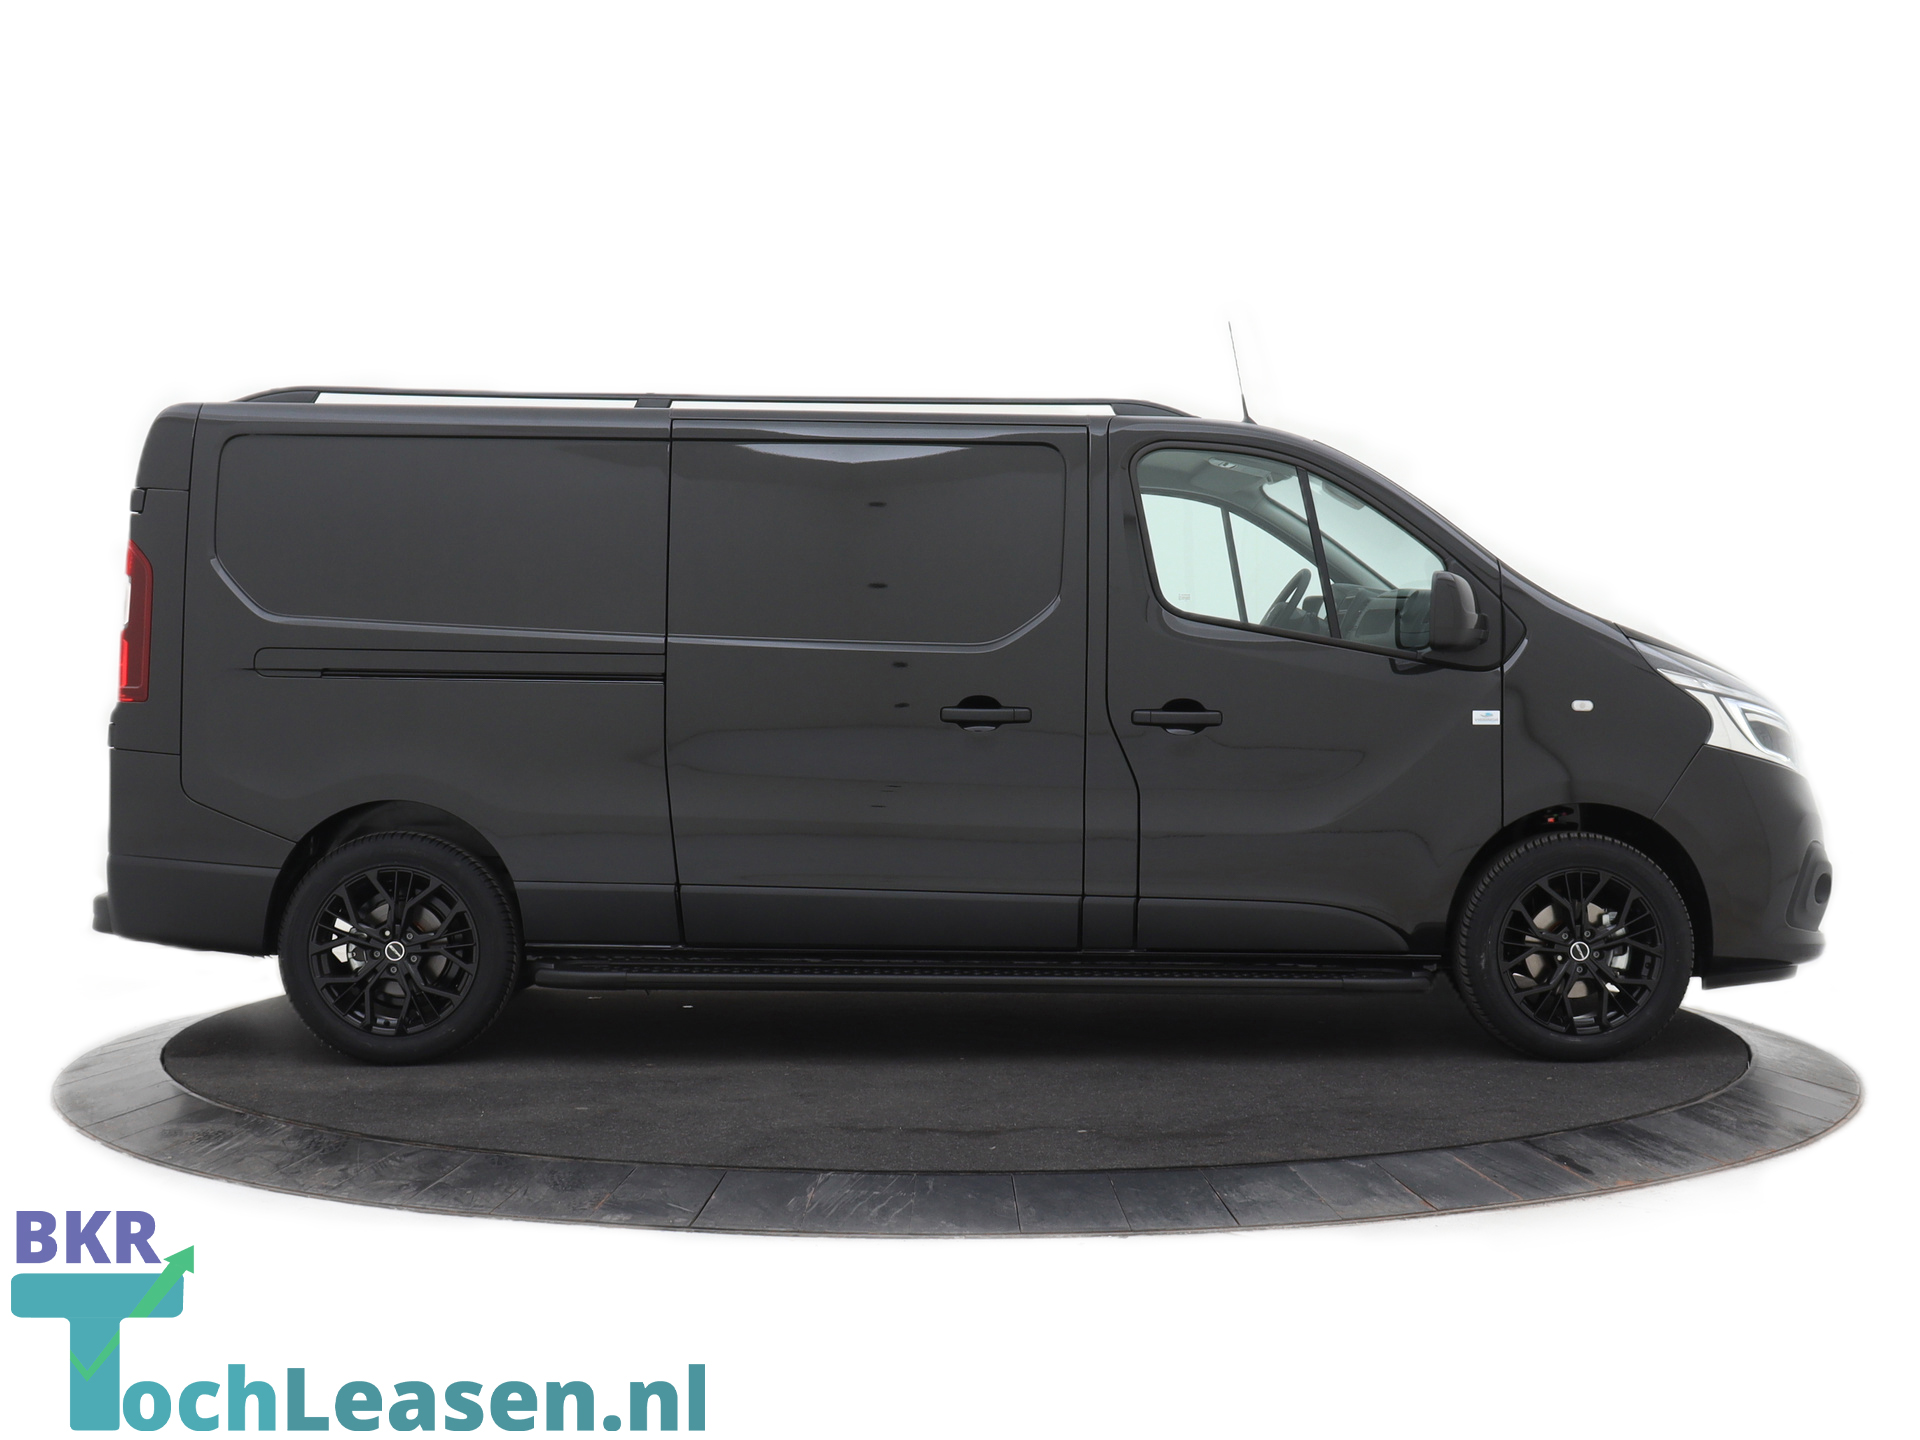 BKRTochLeasen.nl - Renault Trafic Special L2H1